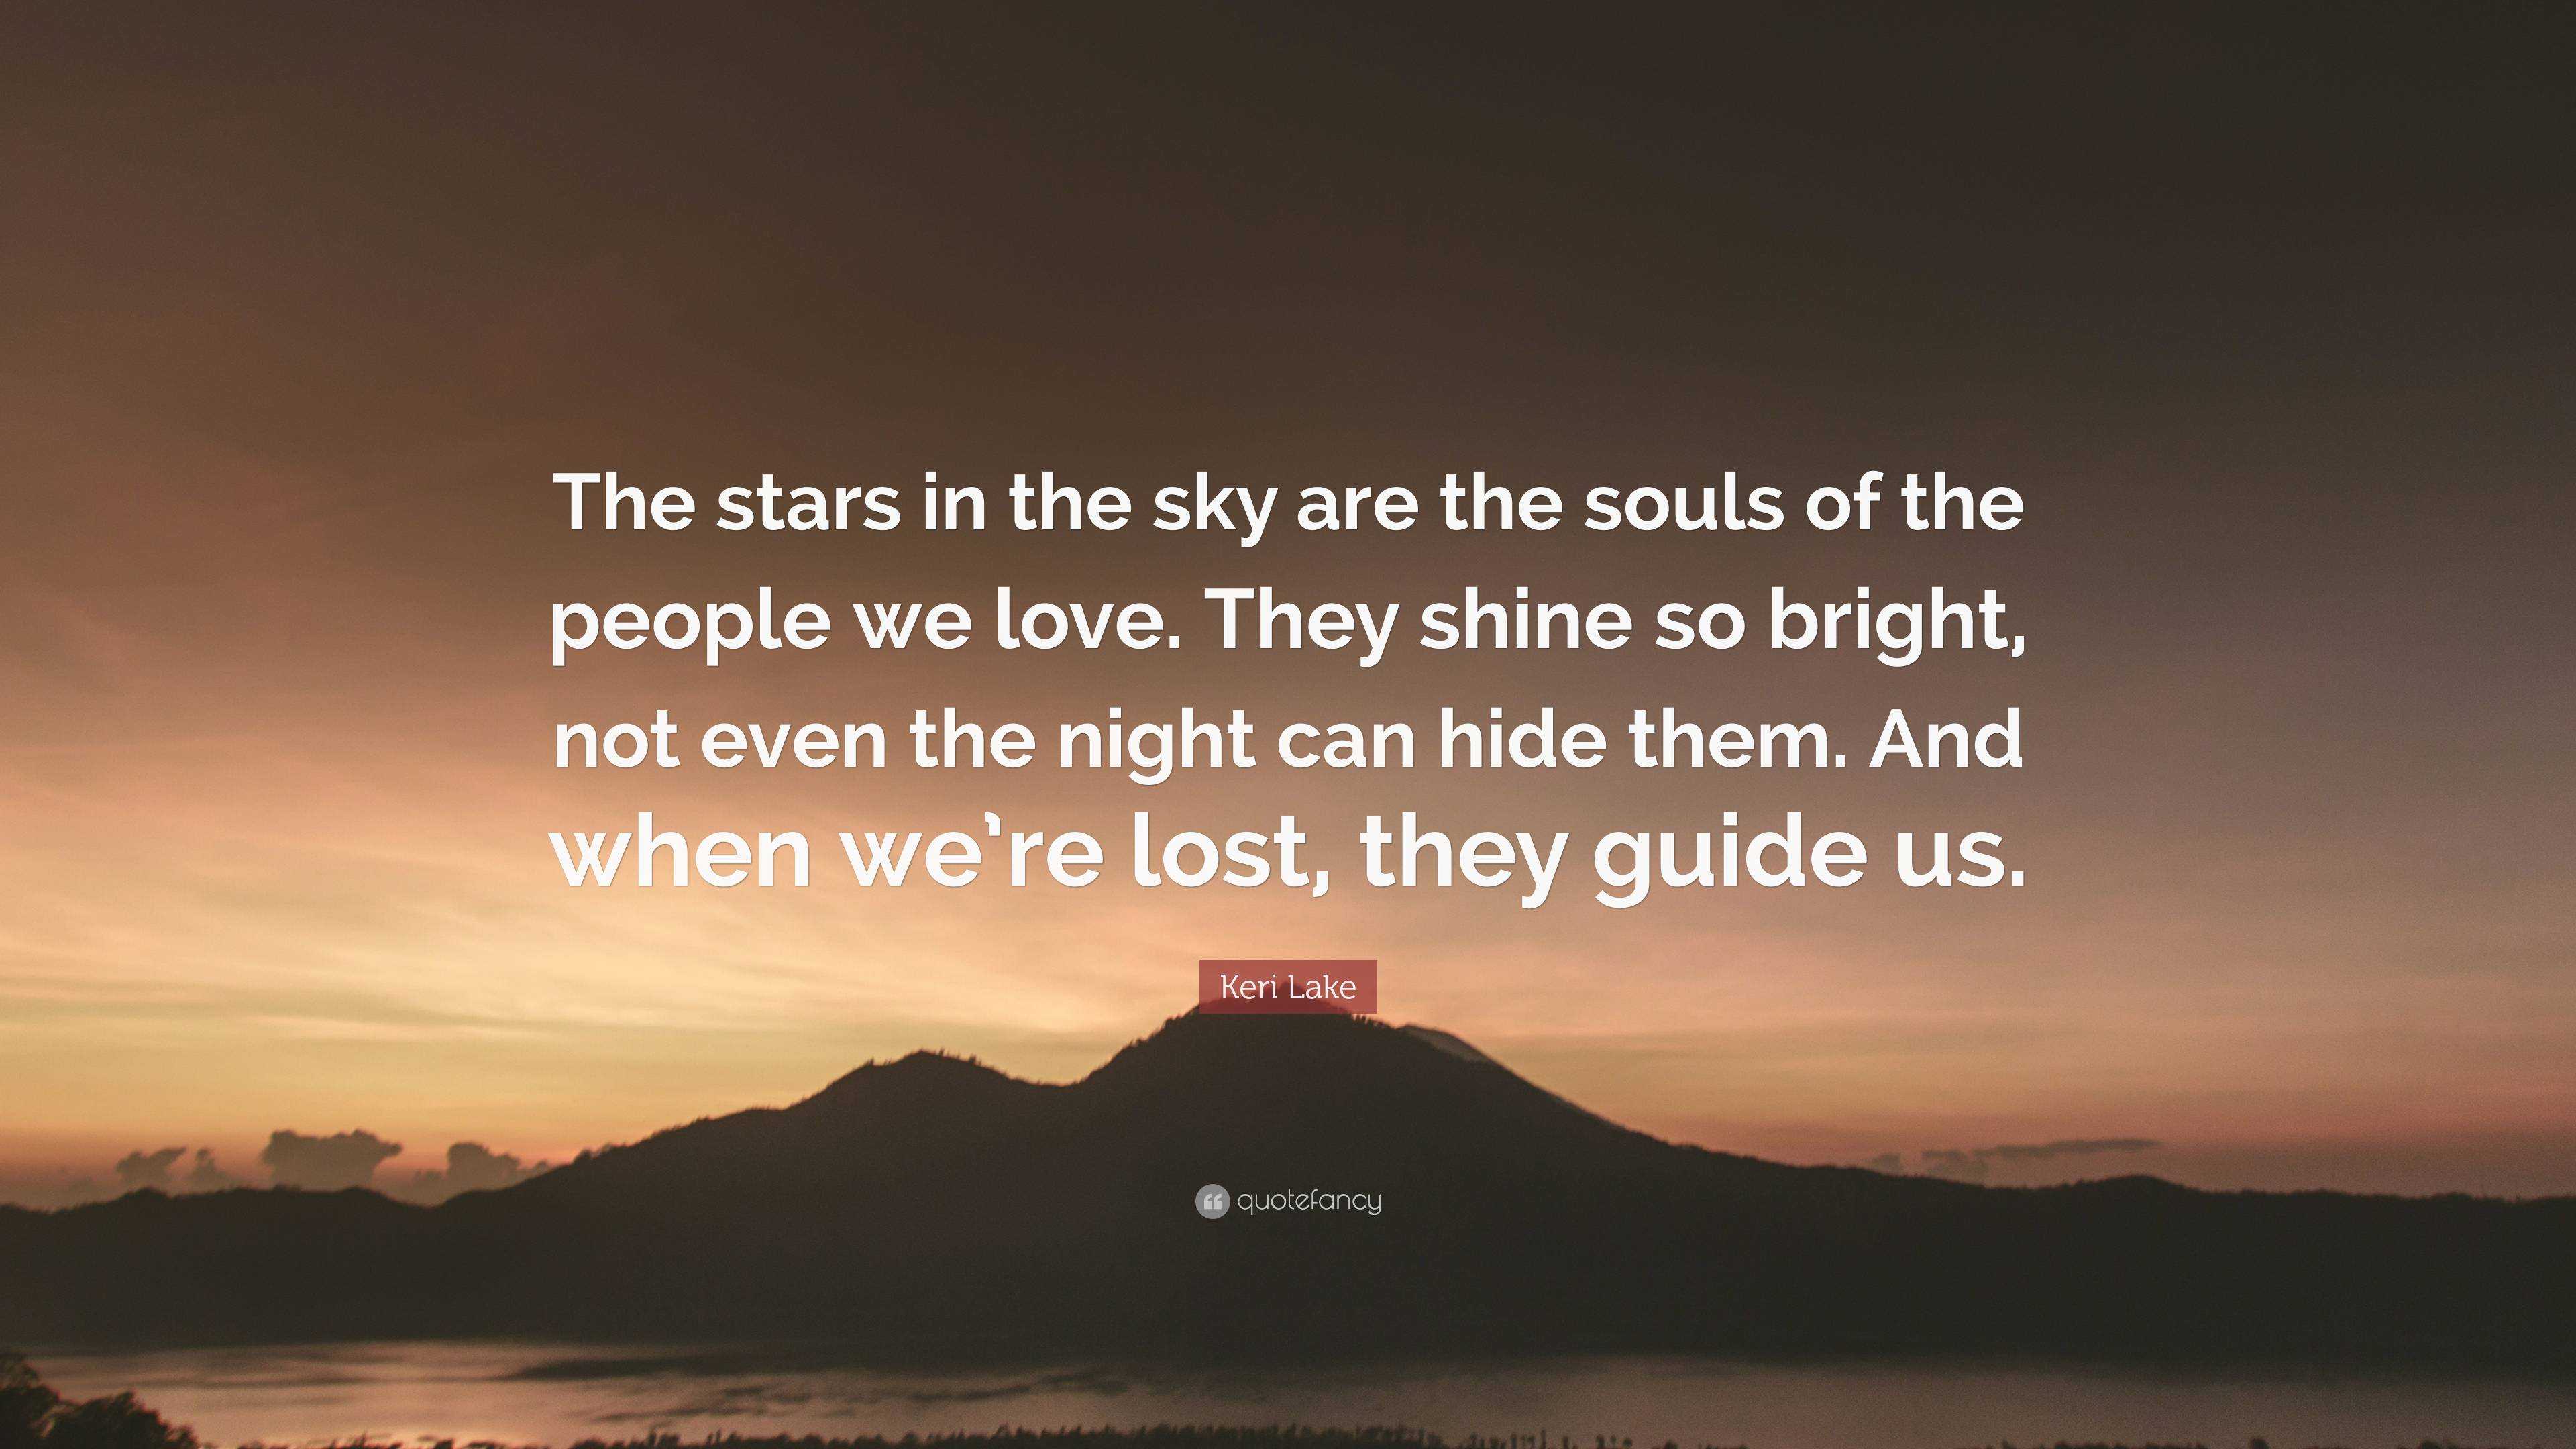 Keri Lake Quote: “The stars in the sky are the souls of the people we love.  They shine so bright, not even the night can hide them. And wh”